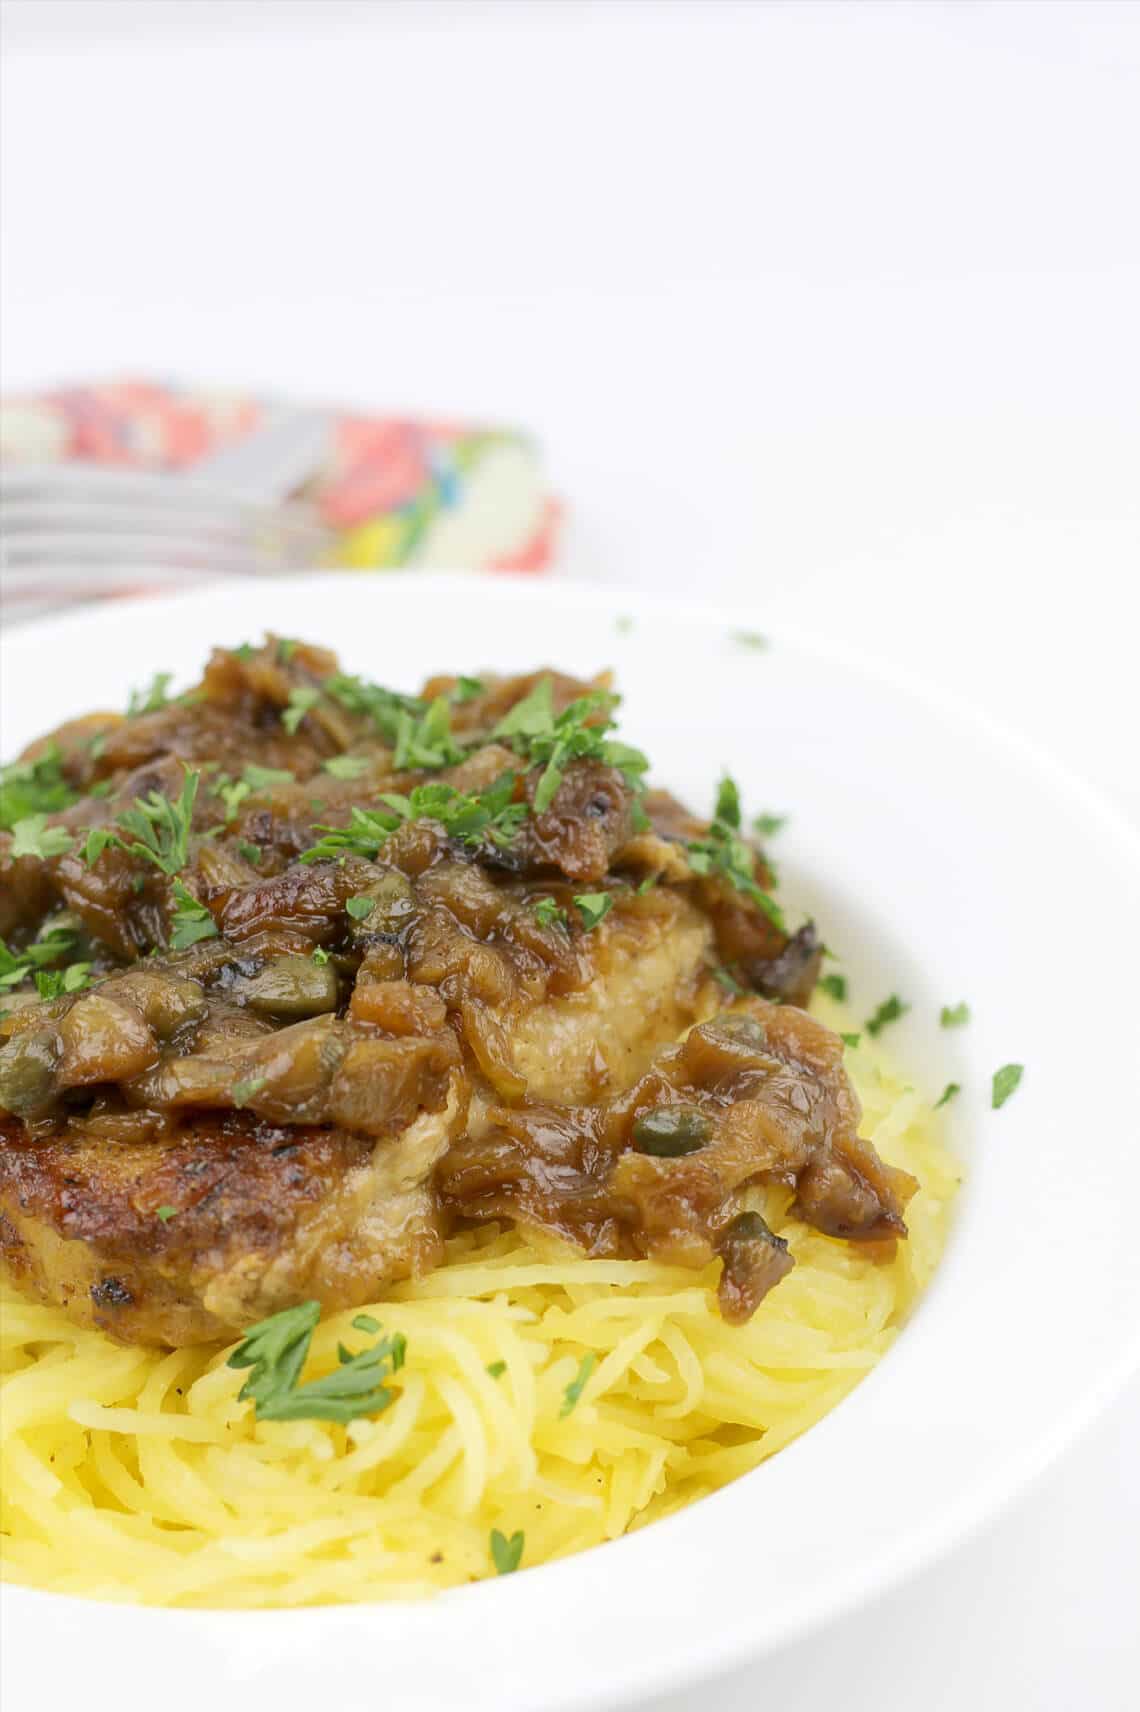 Pork chops with caramelized onions, capers, and white wine are delicious with noodles, mashed potatoes, cheese grits, or spaghetti squash.